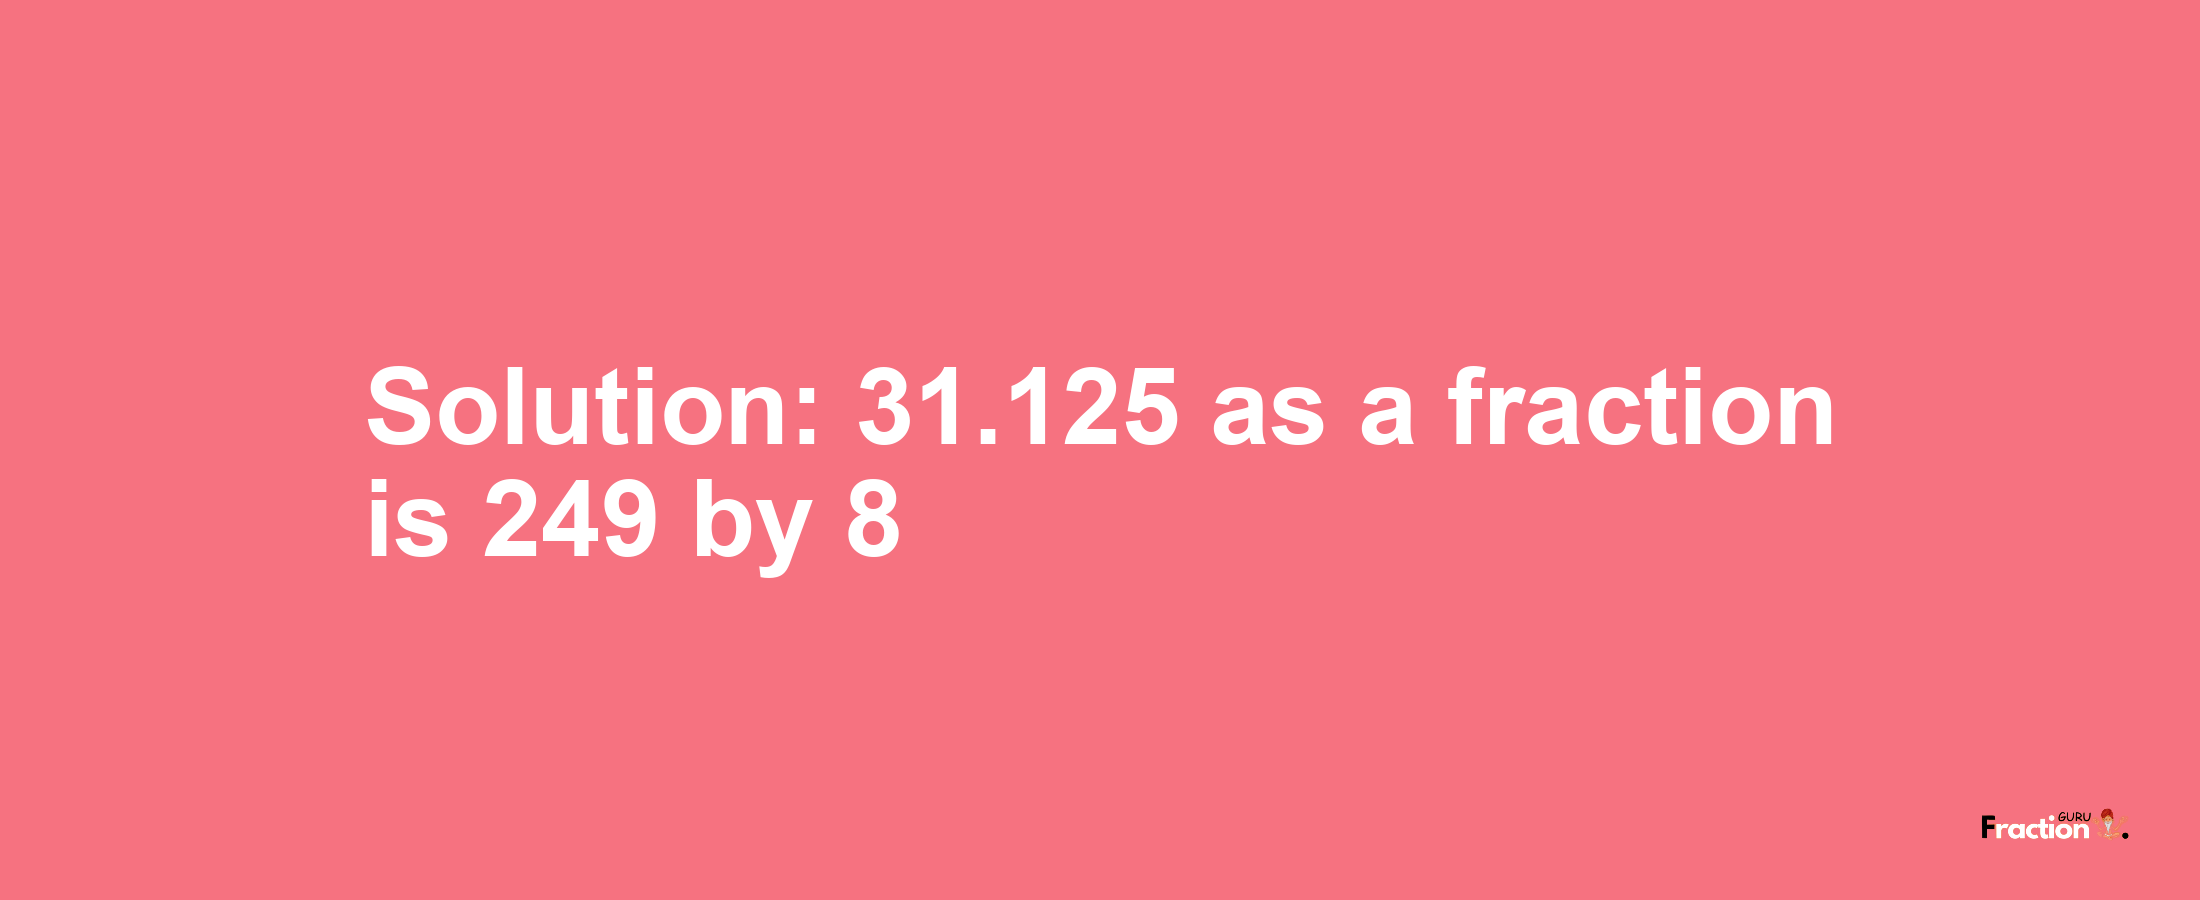 Solution:31.125 as a fraction is 249/8